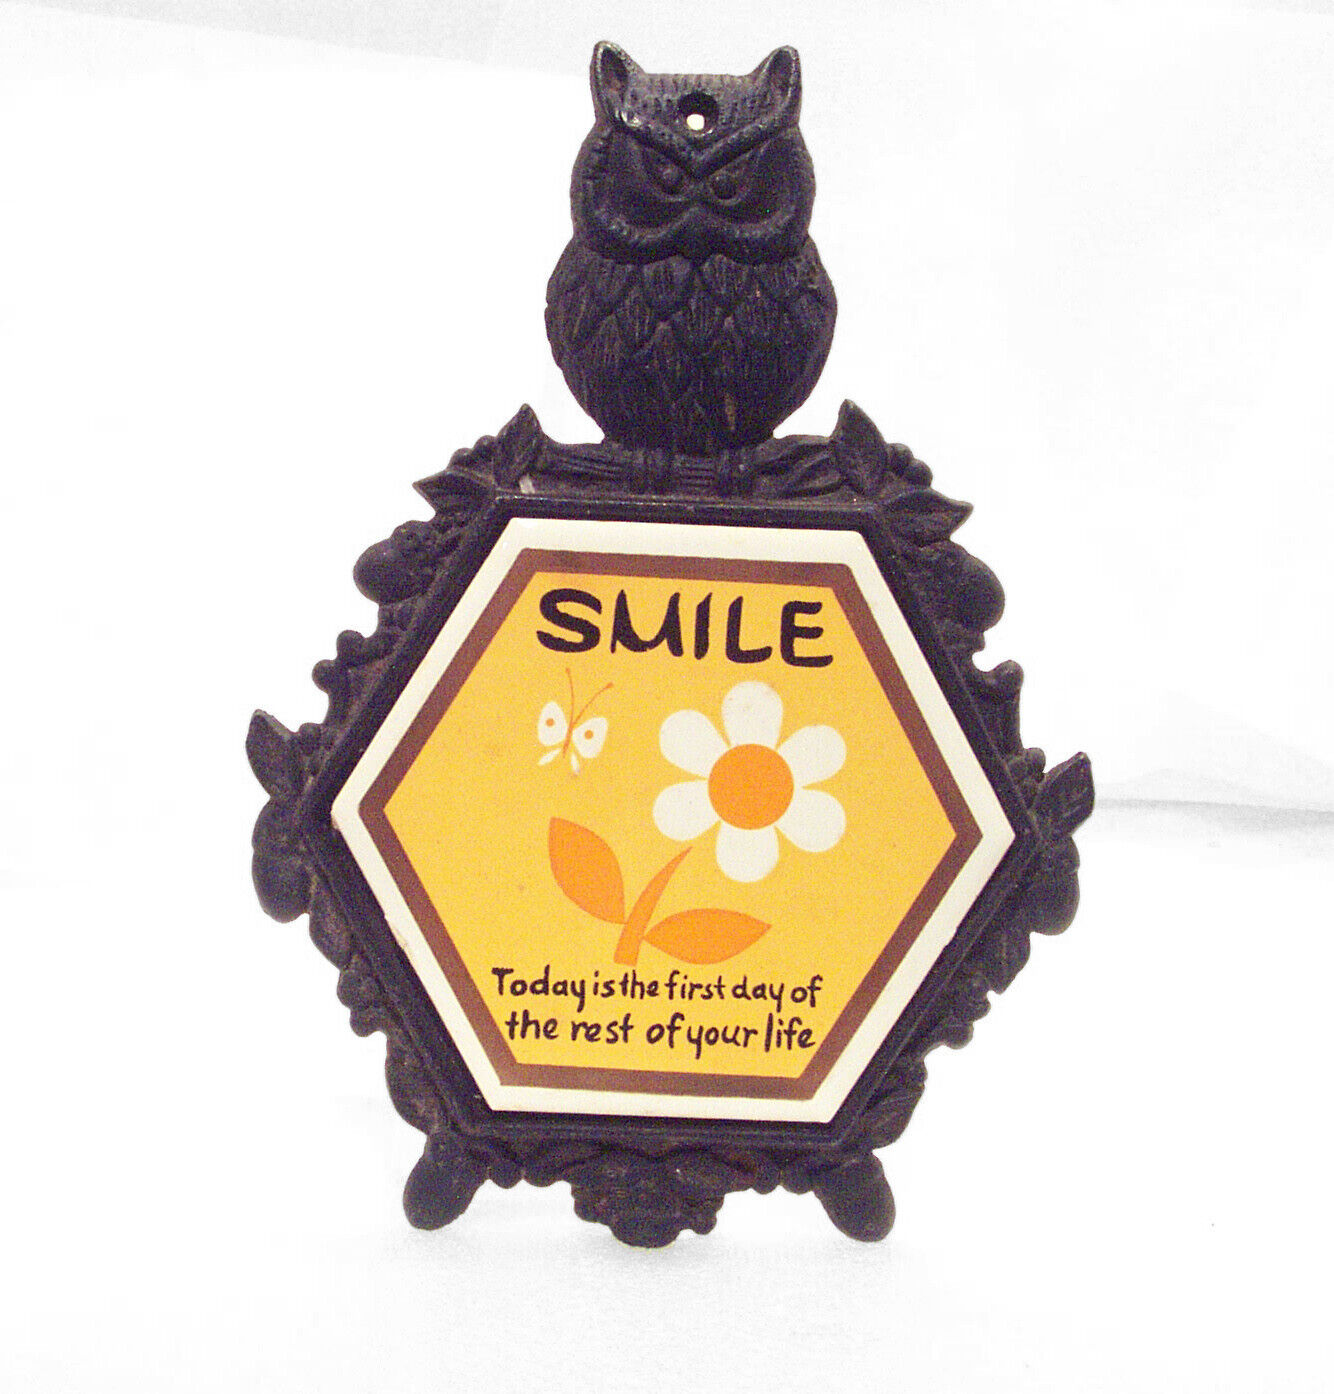 Vint age OWL Trivet Black Iron SMILE Today is the First Day Rest of Your Life